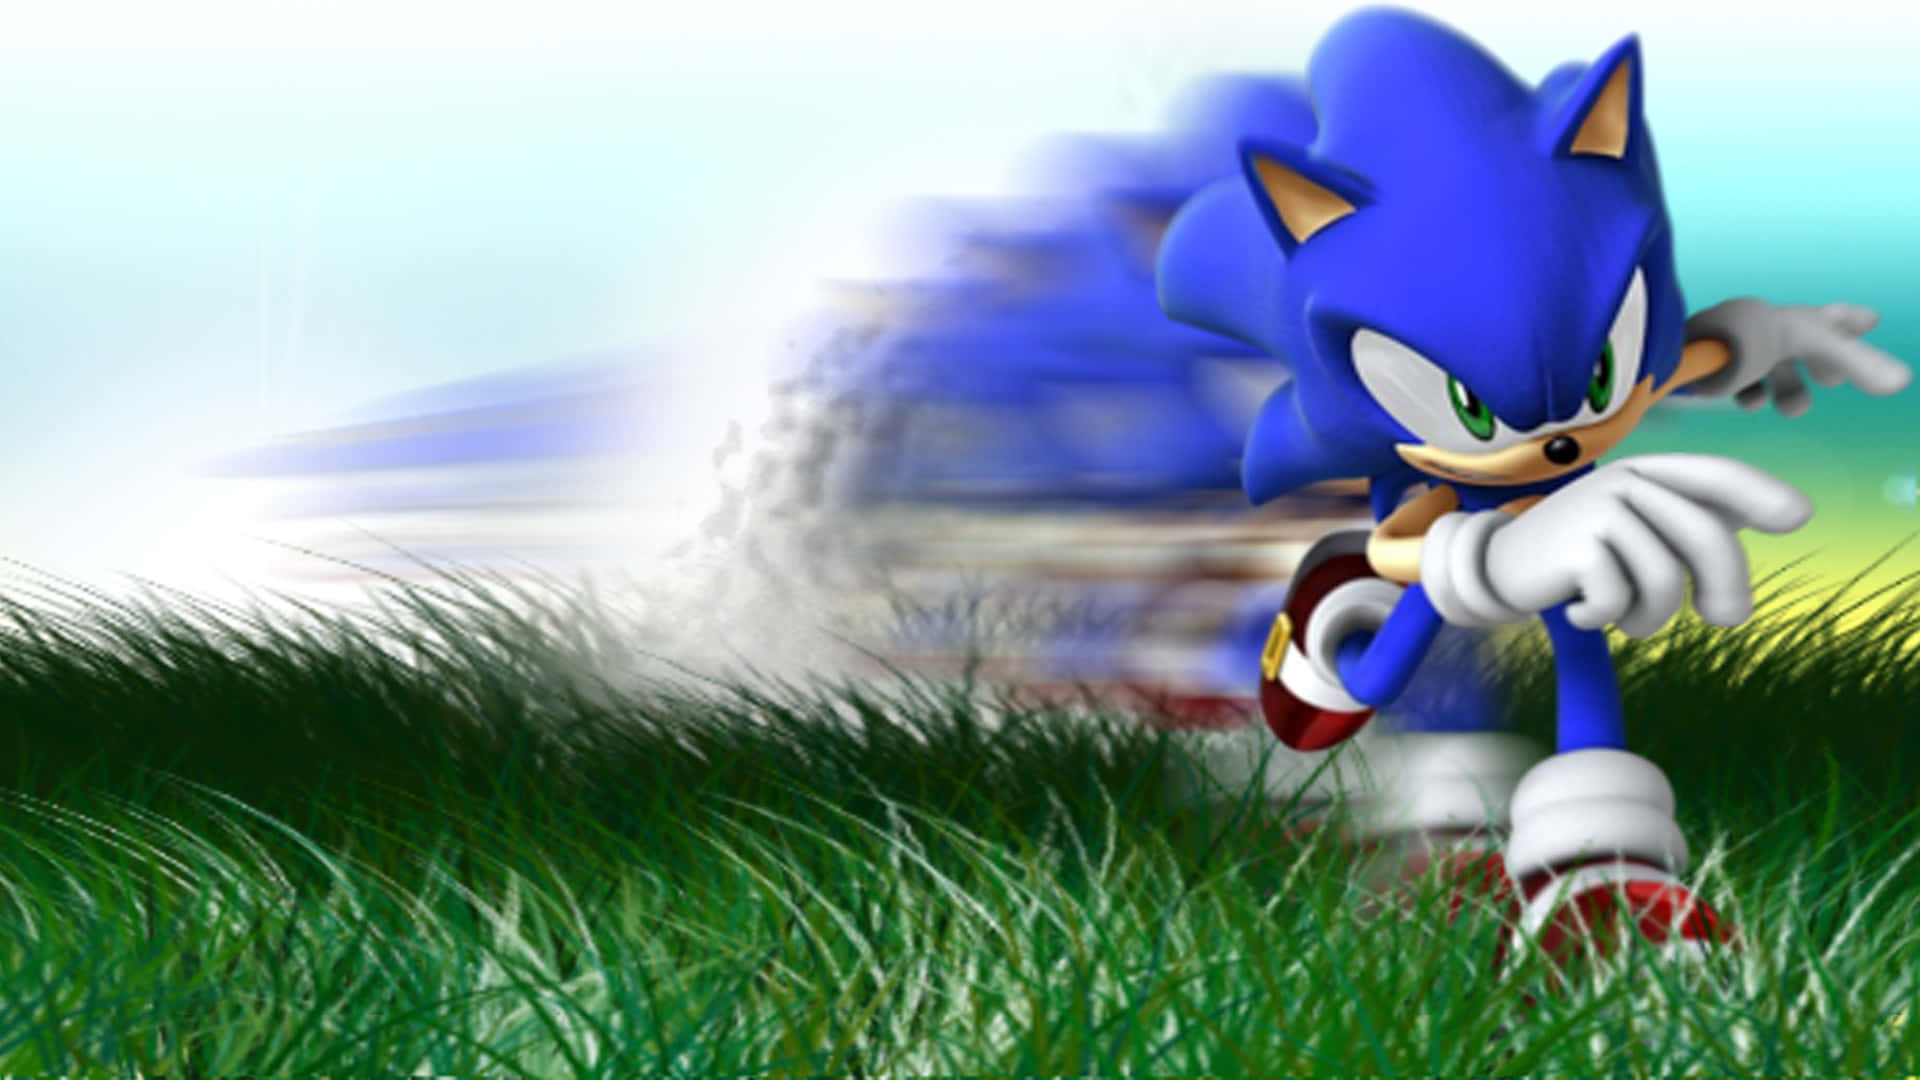 "Sonic the Hedgehog - The Blue Blur of Speed"